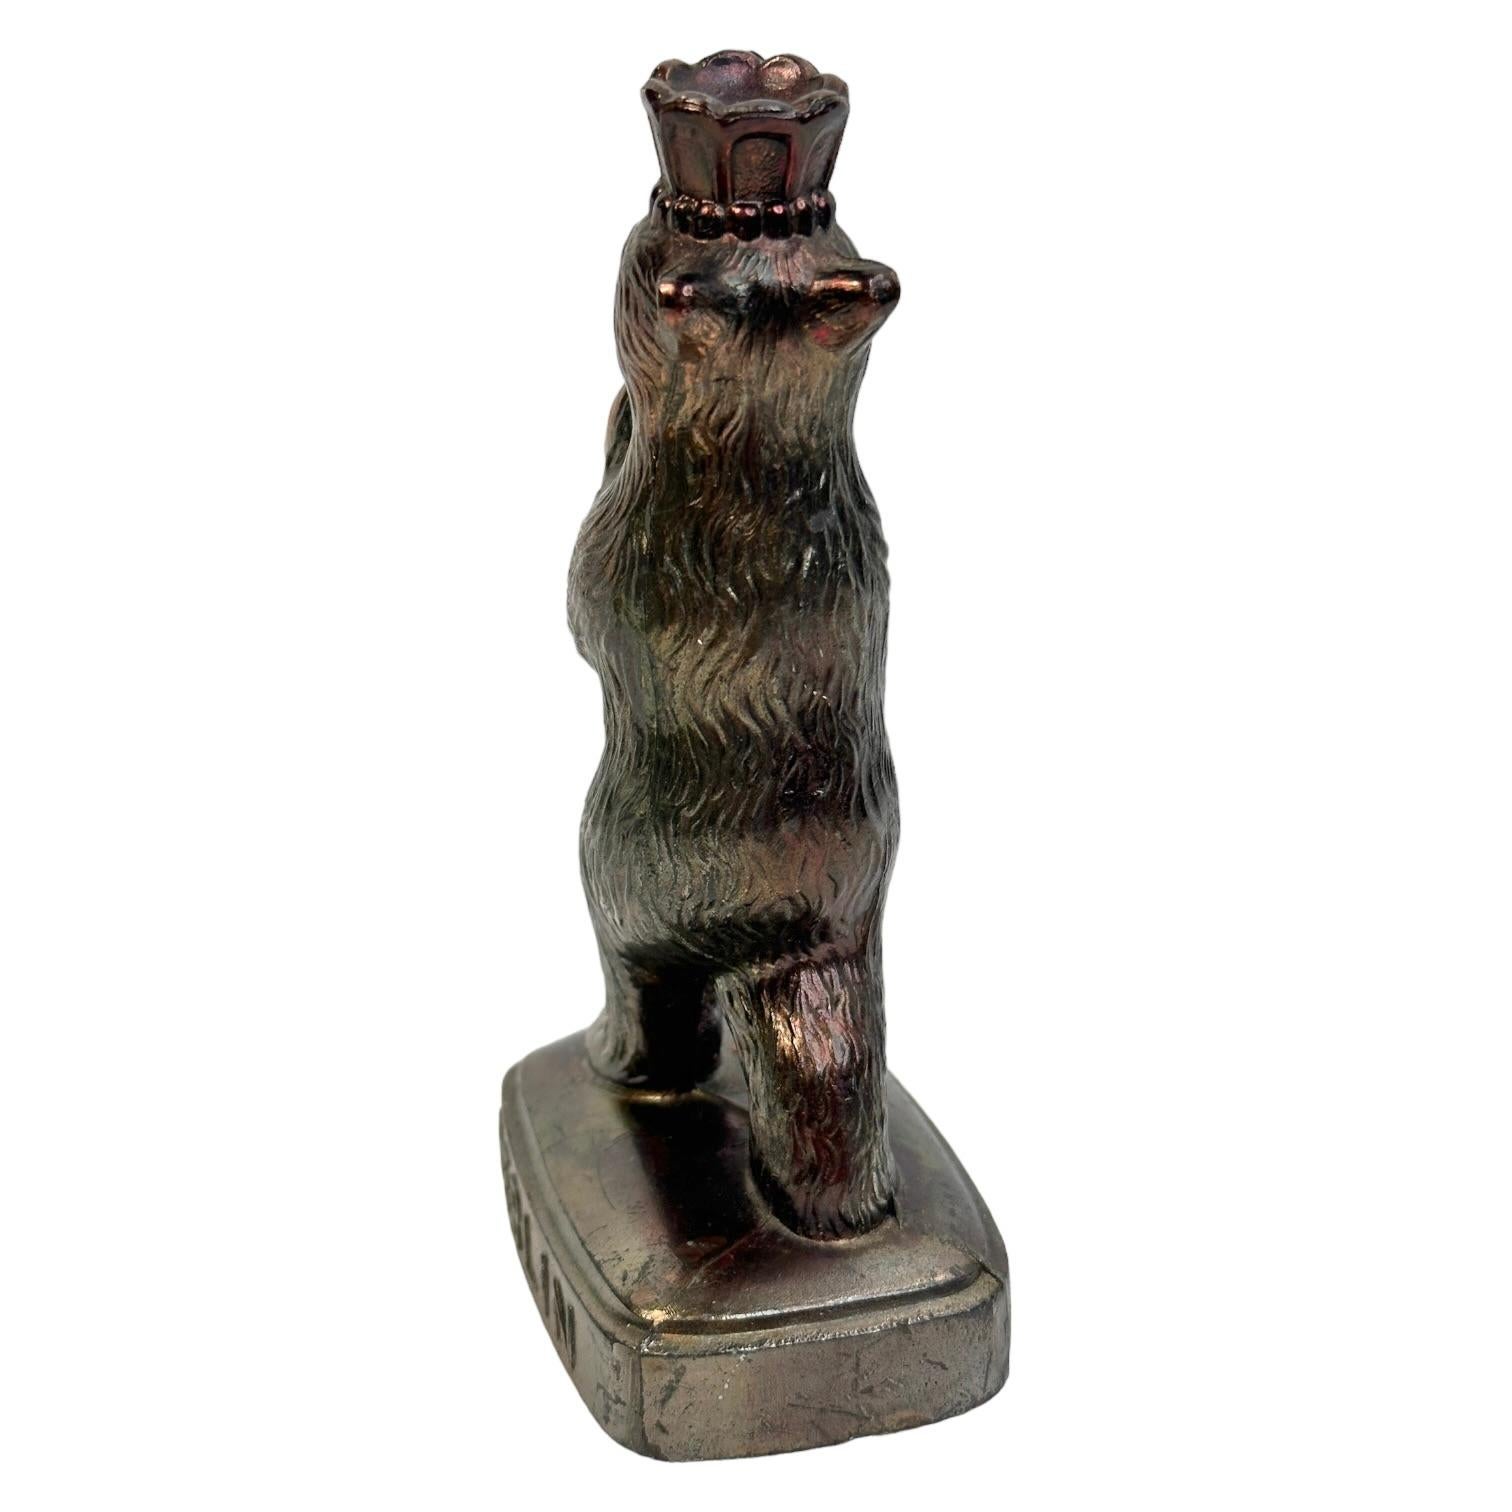 A classic decorative Berlin bear statue. Some wear with a nice patina, but this is old-age. Made of metal. This item was bought as a souvenir in Berlin and was made in the mid-20th century probably to the end of 1960s.